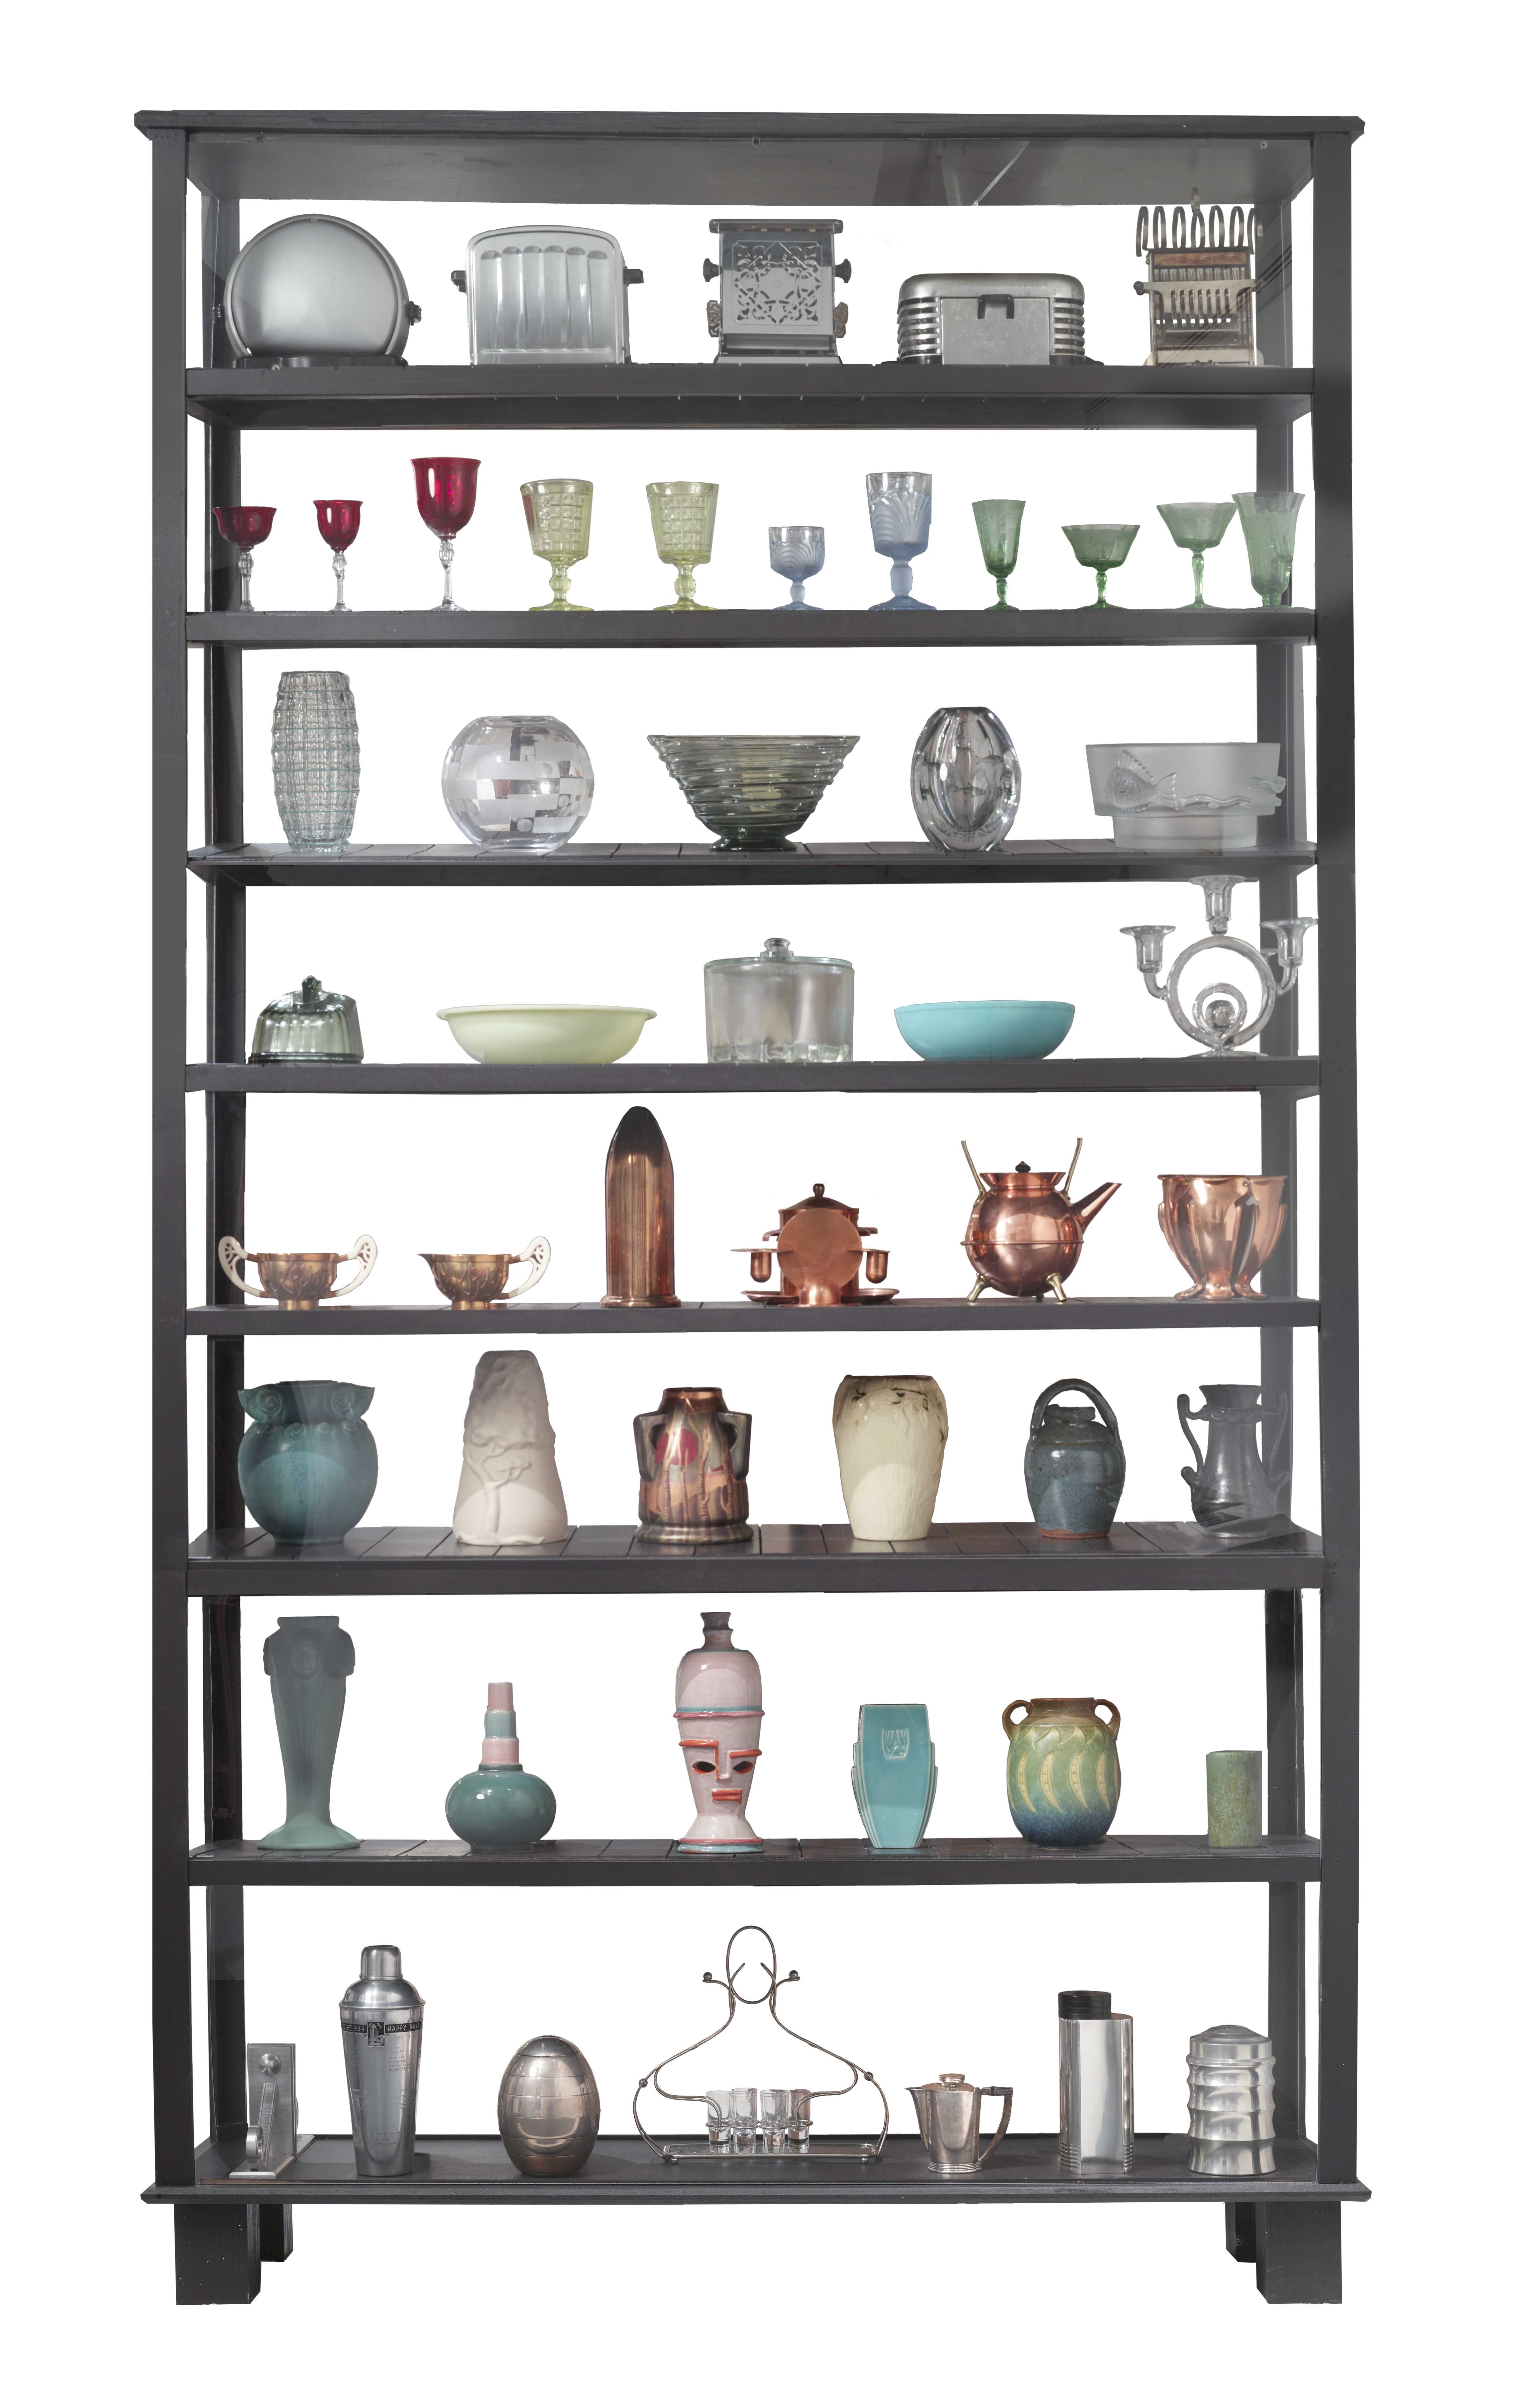 Test image of shelving for image map